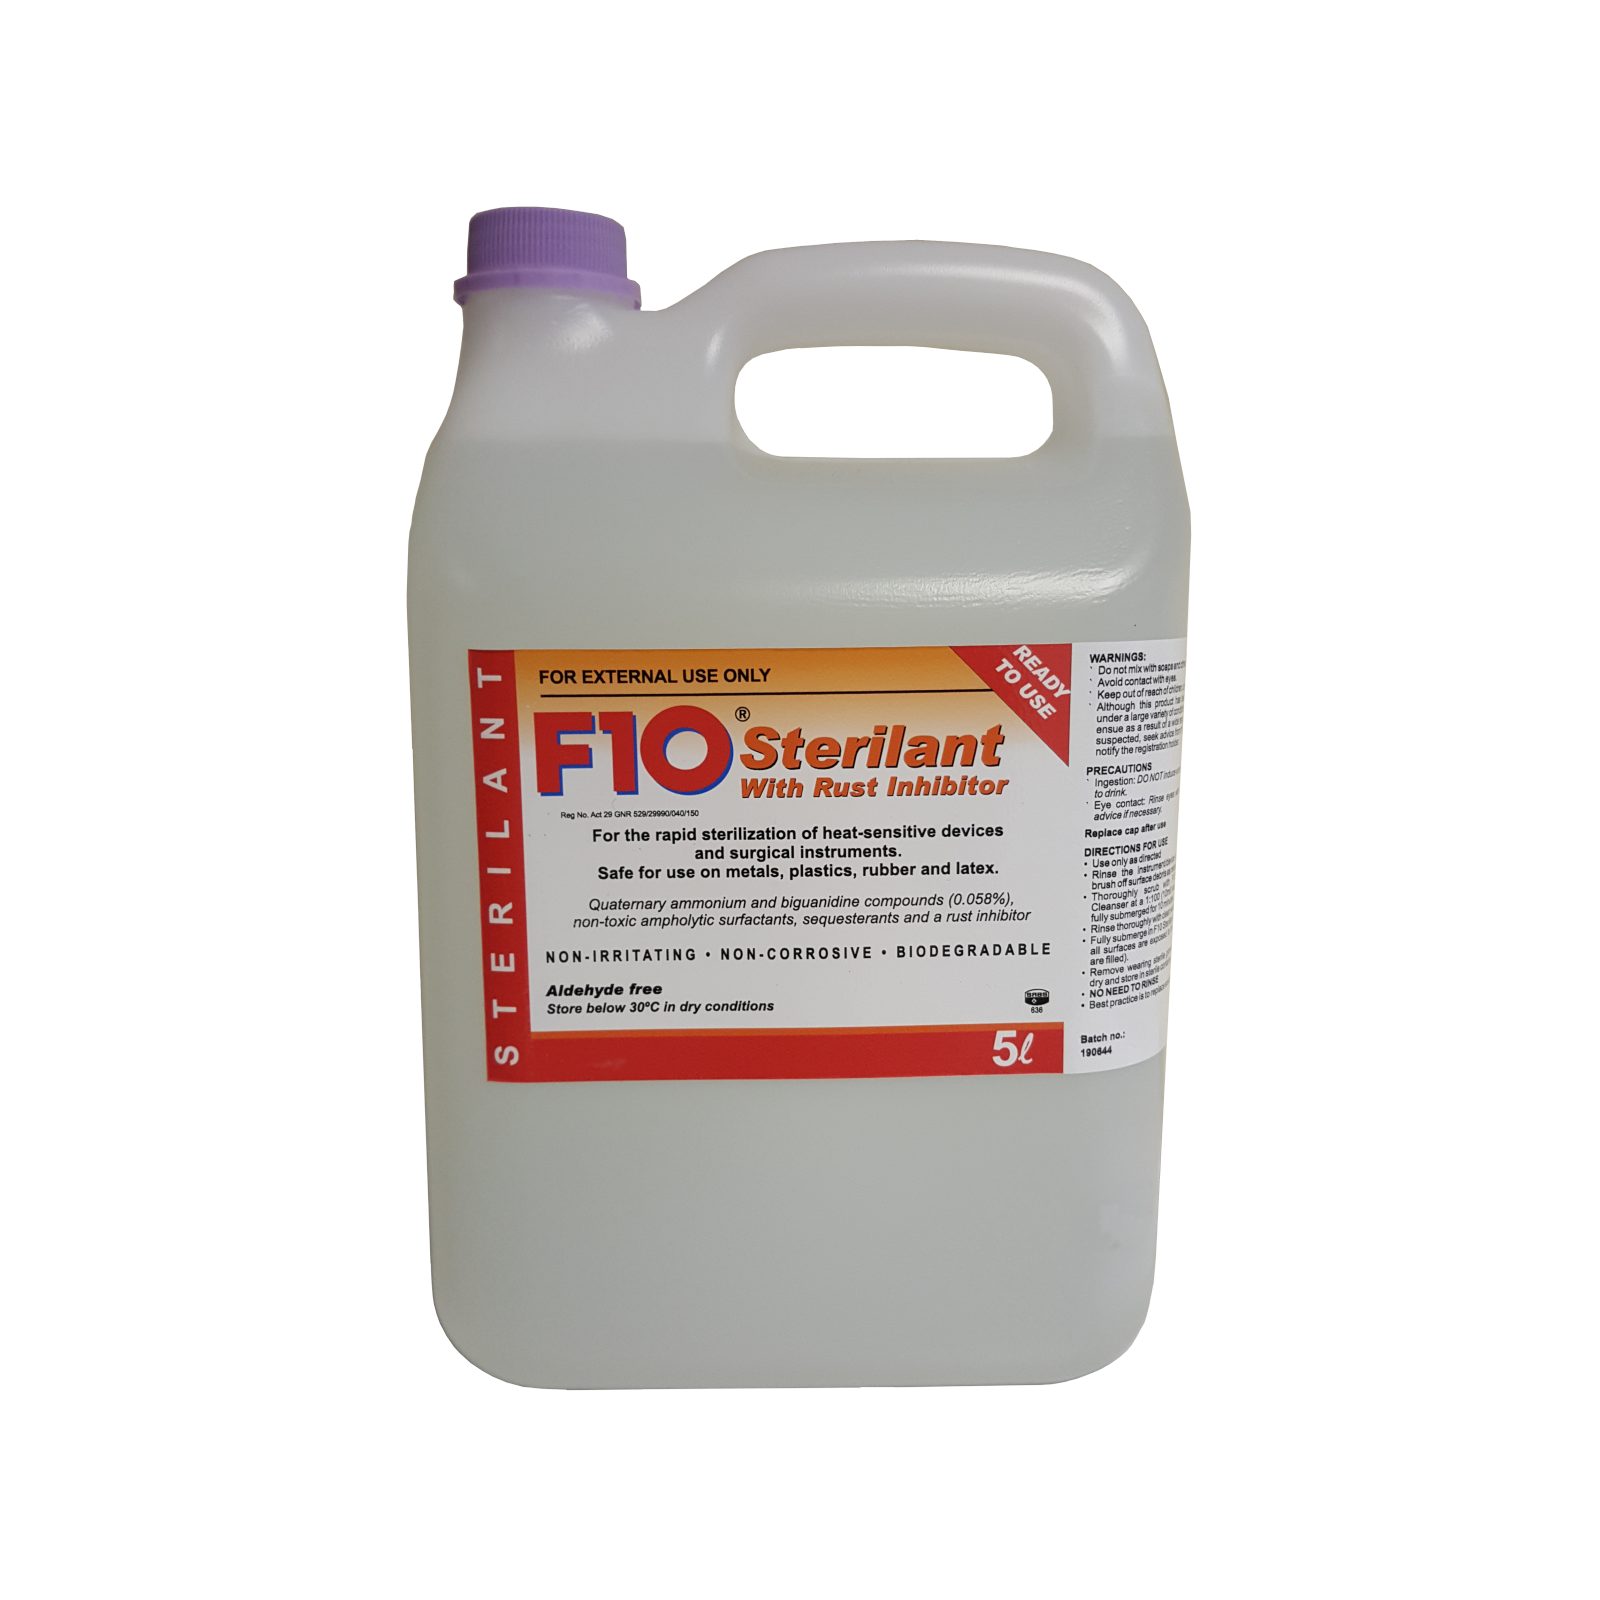 A 5 litre bottle of F10 Sterilant with Rust Inhibitor